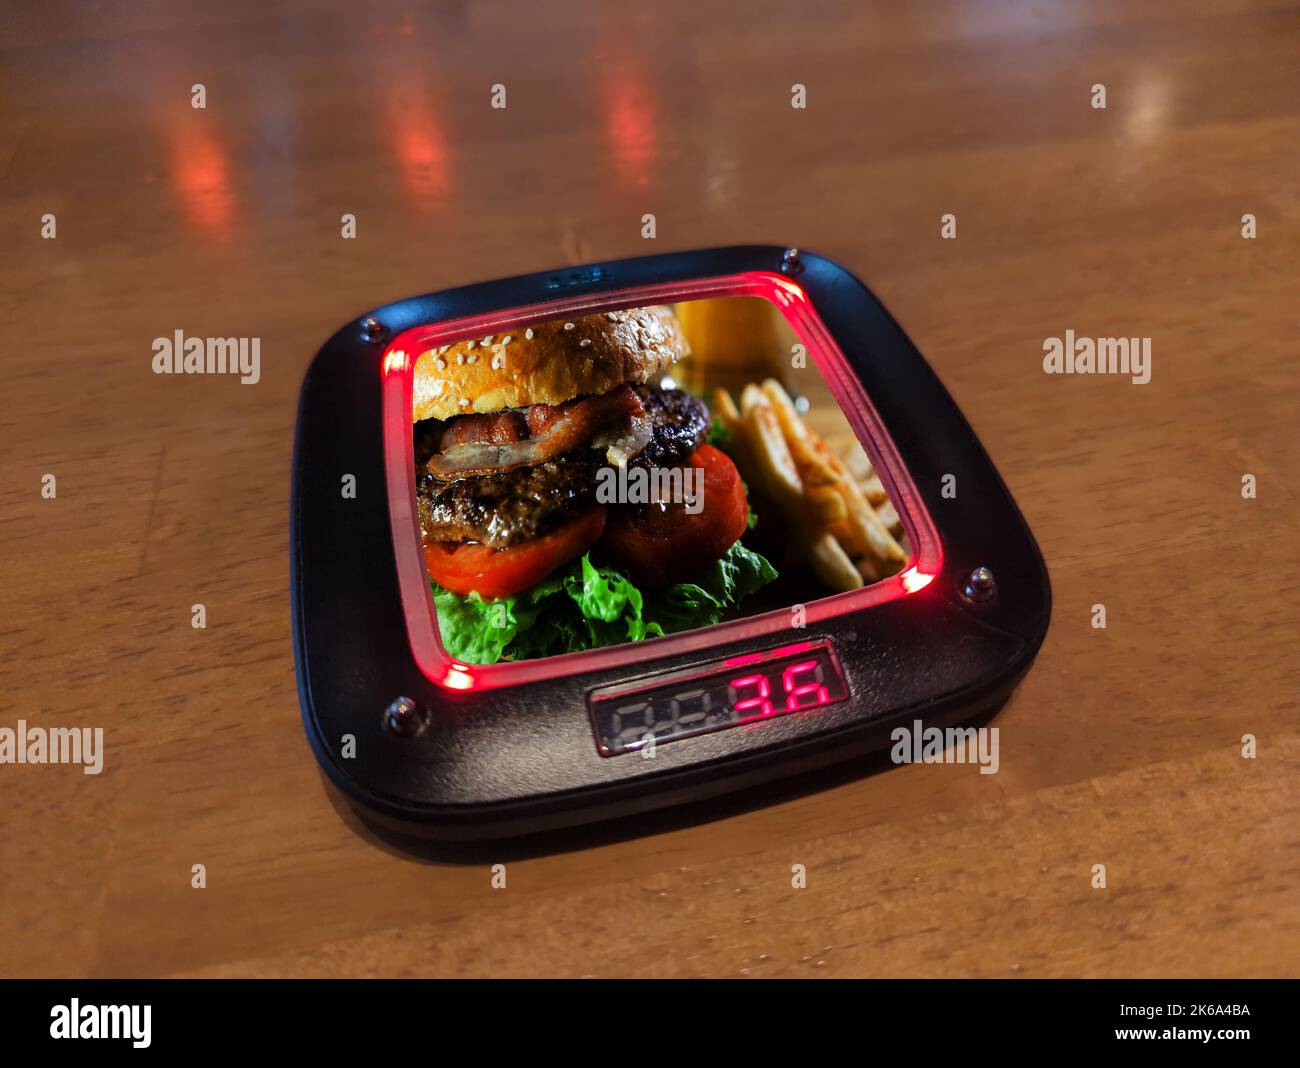 Restaurant pager with warning lights lit indicating diners order is ready. Stock Photo